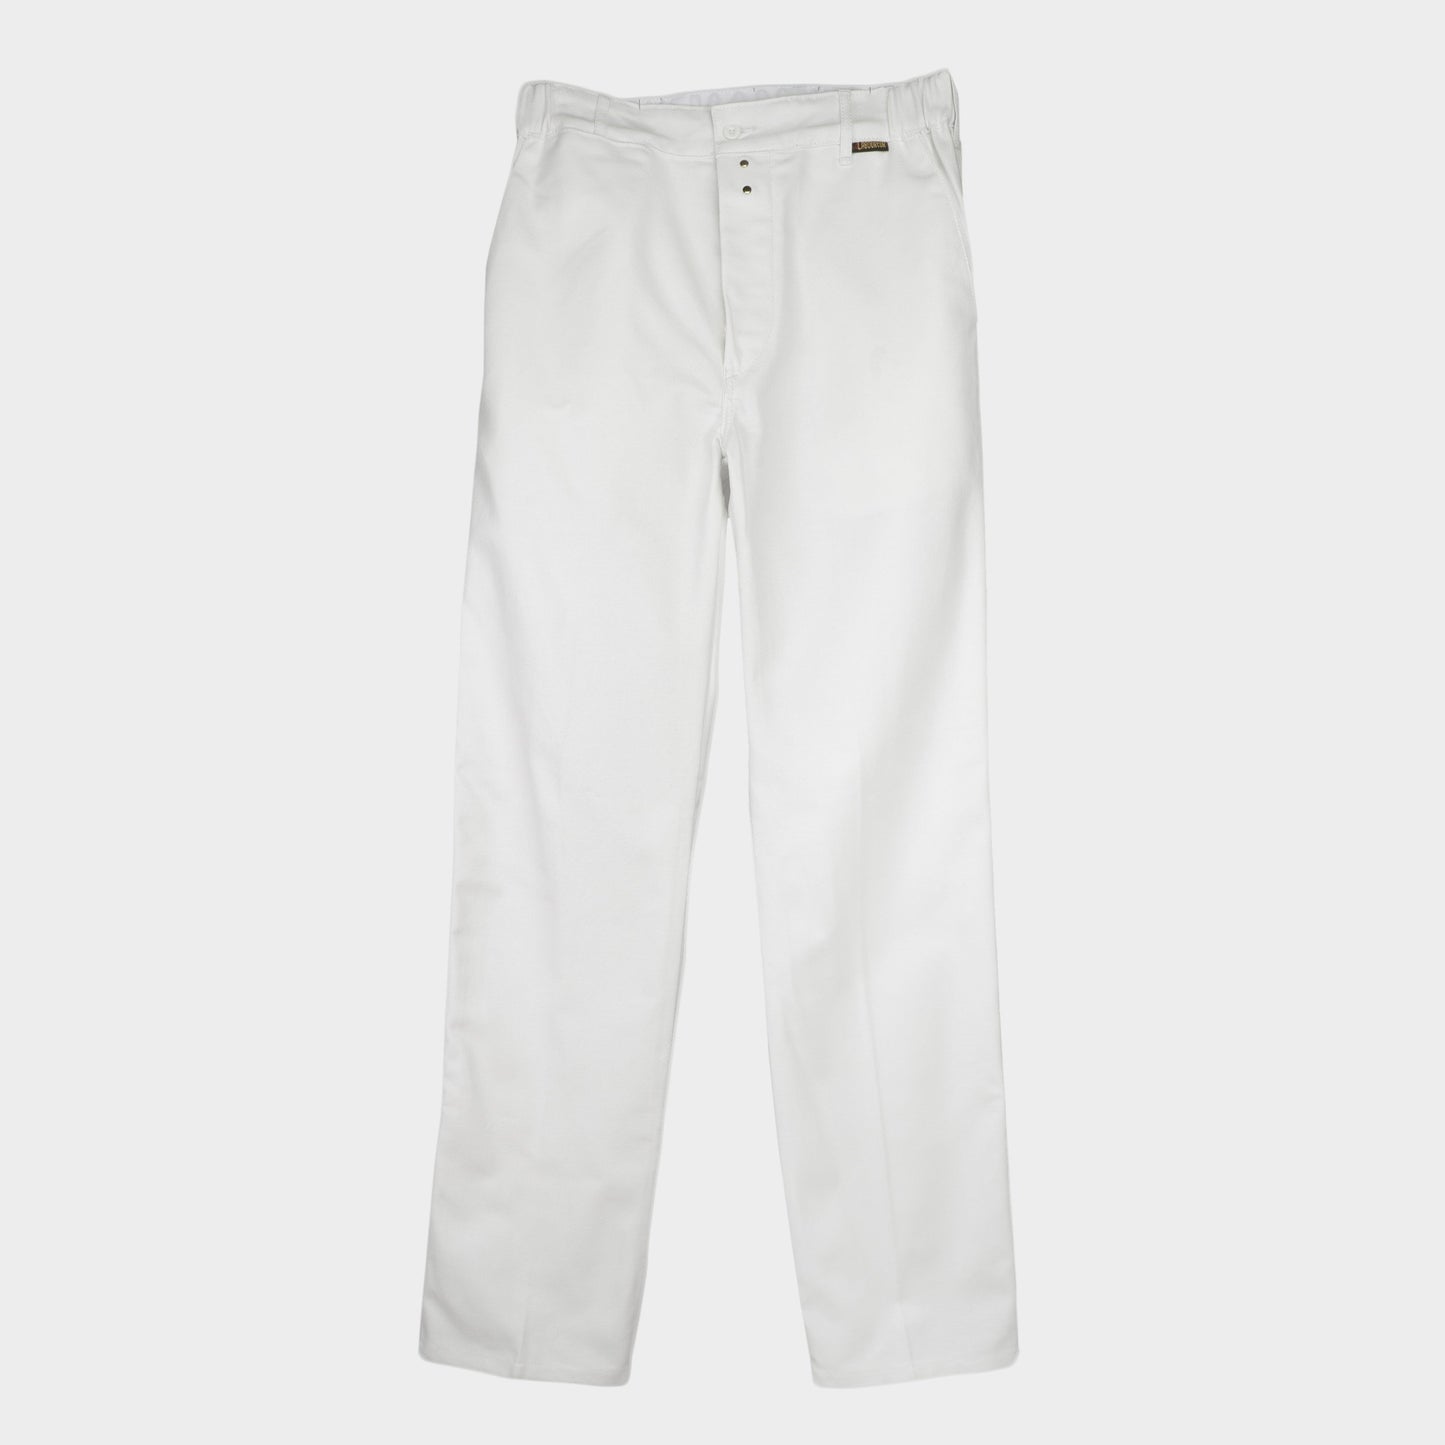 (Sold Out) Le Laboureur French Cotton Work Pant in White